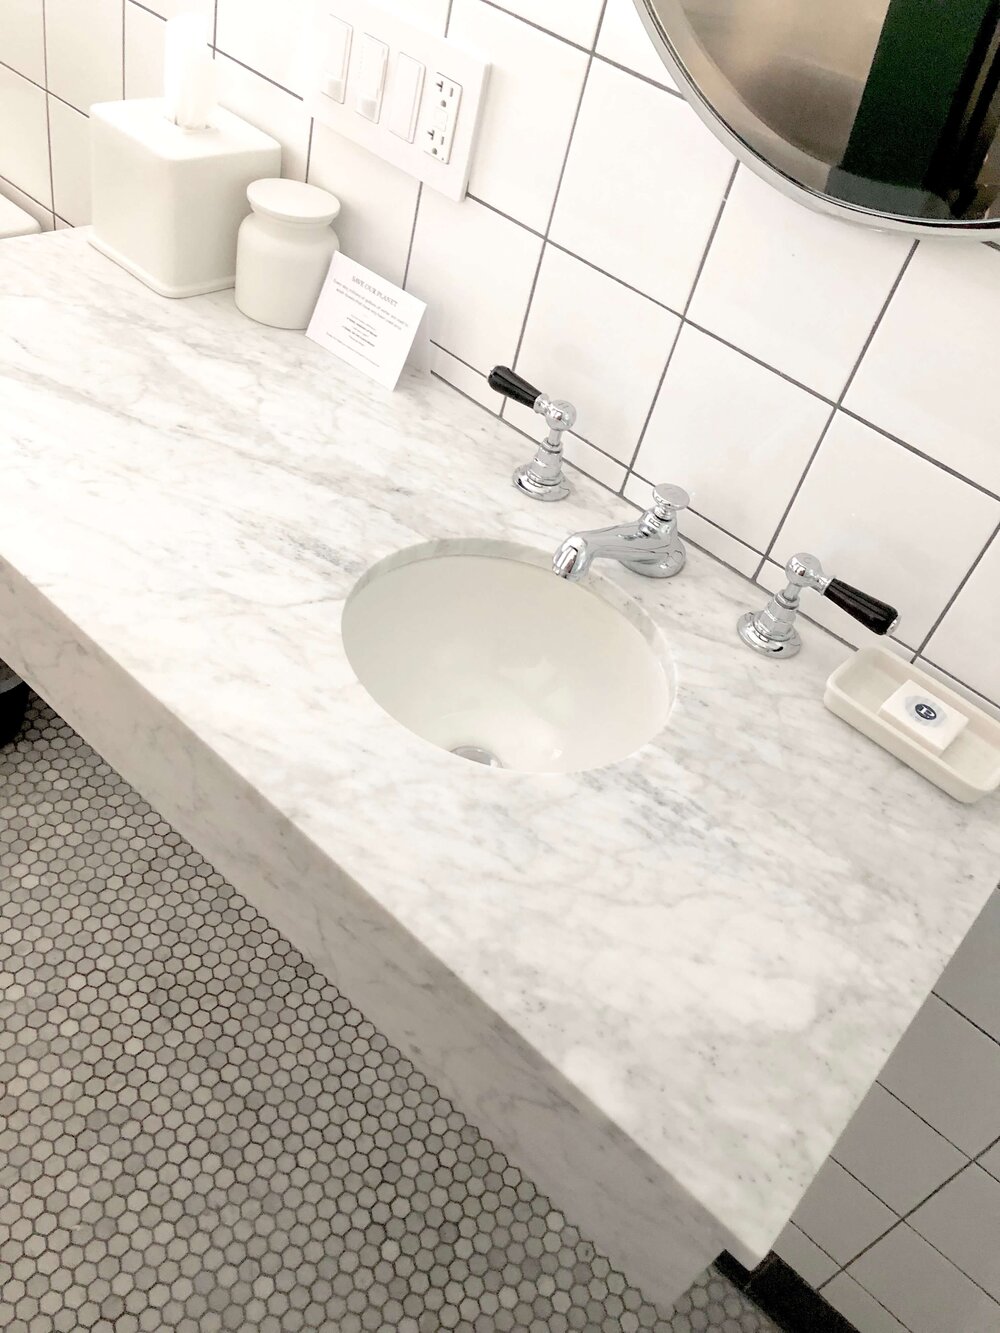 Small Bathroom Design Tips - Hotel bathroom with Carrara marble countertop and small round sink.